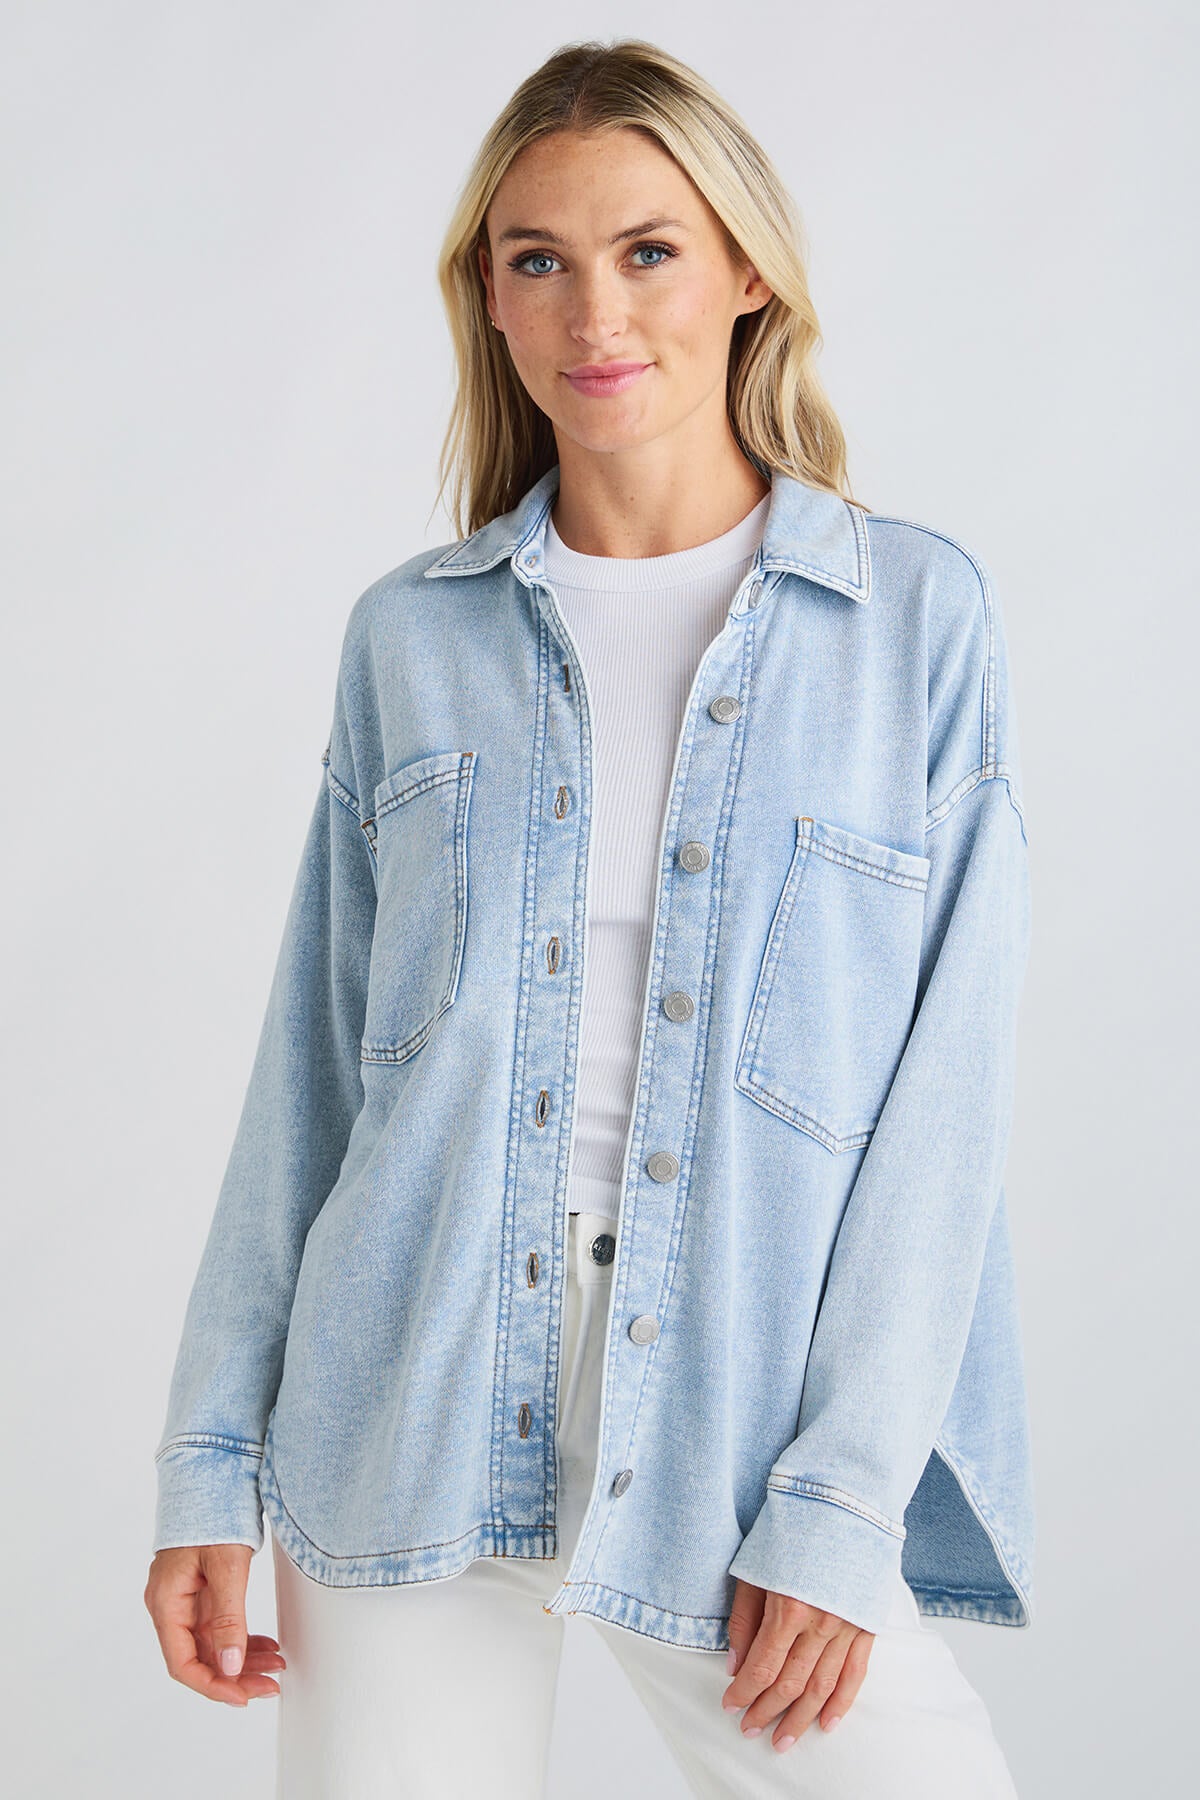 10 Denim Jackets to Add Style and Edge to Your Outfits